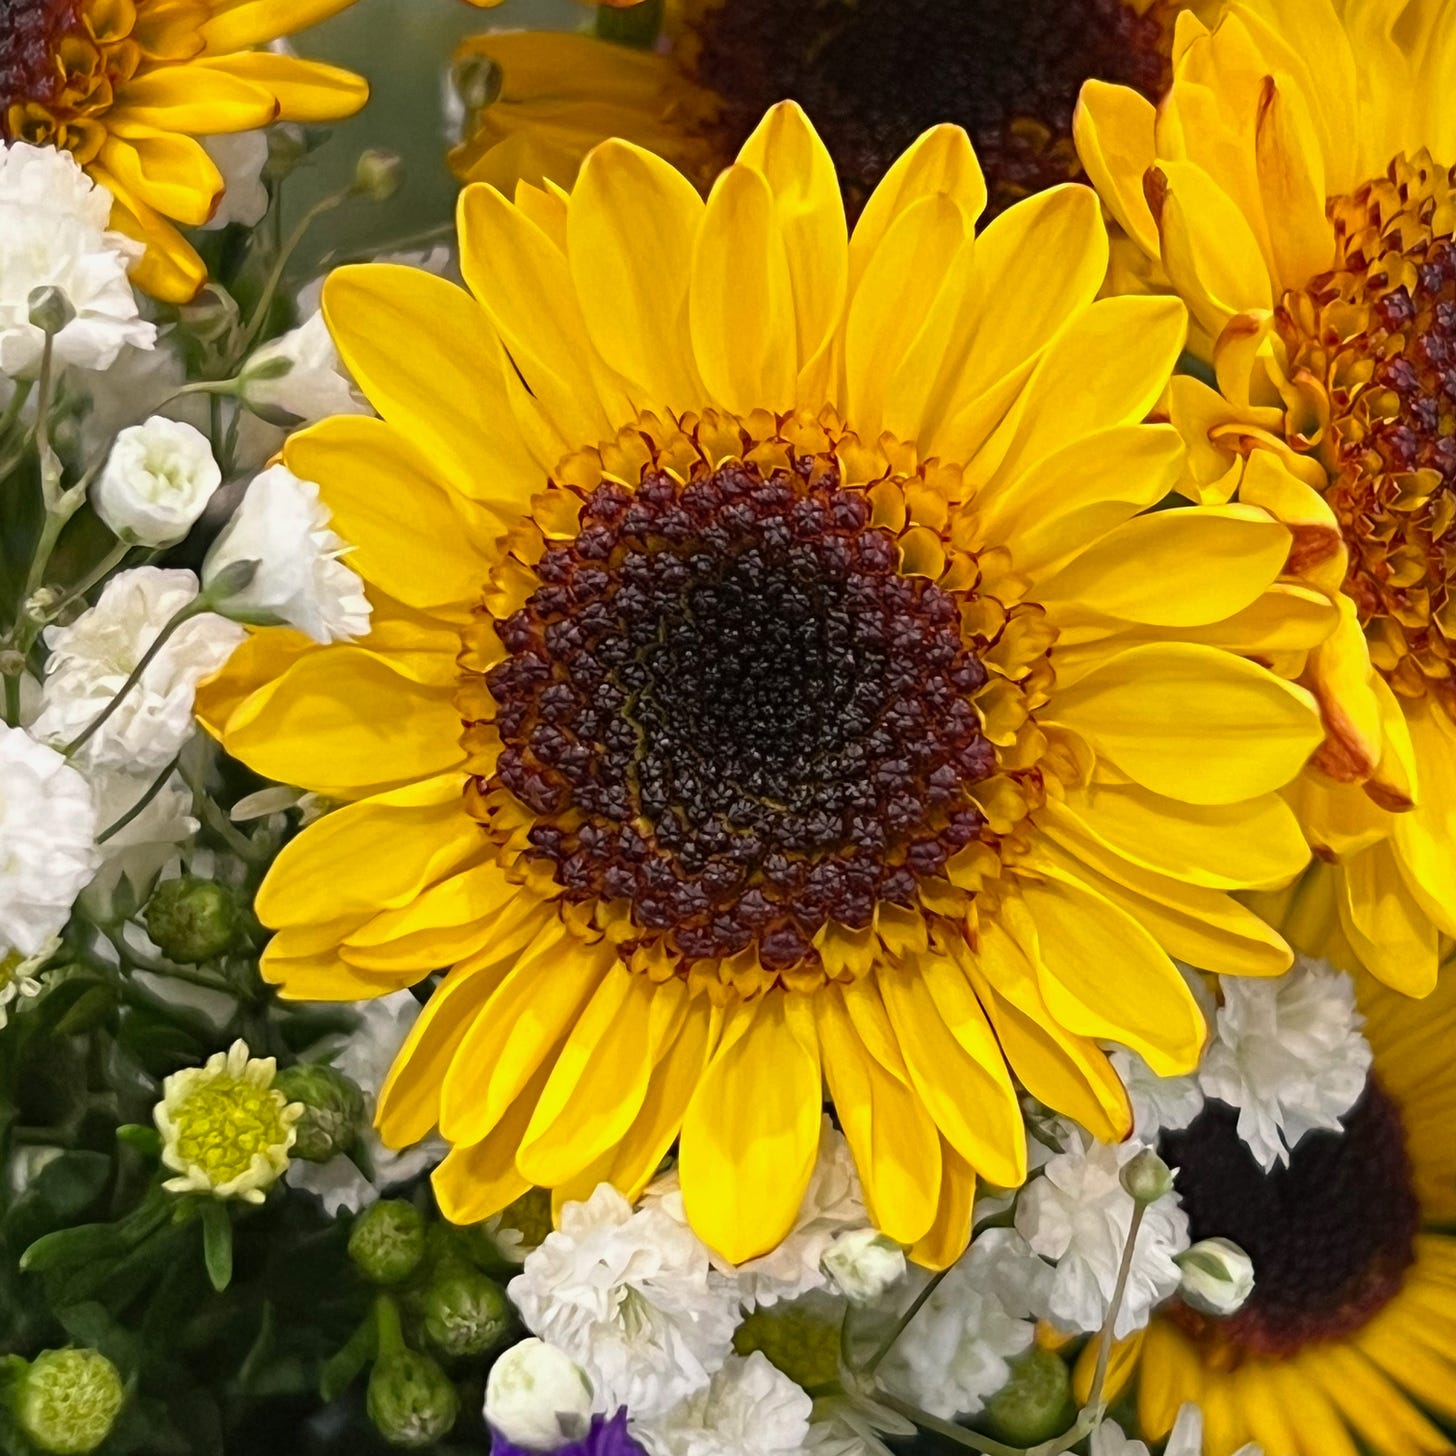 A large yellow sunflower with a brown center nestled in a bouquet of flowers